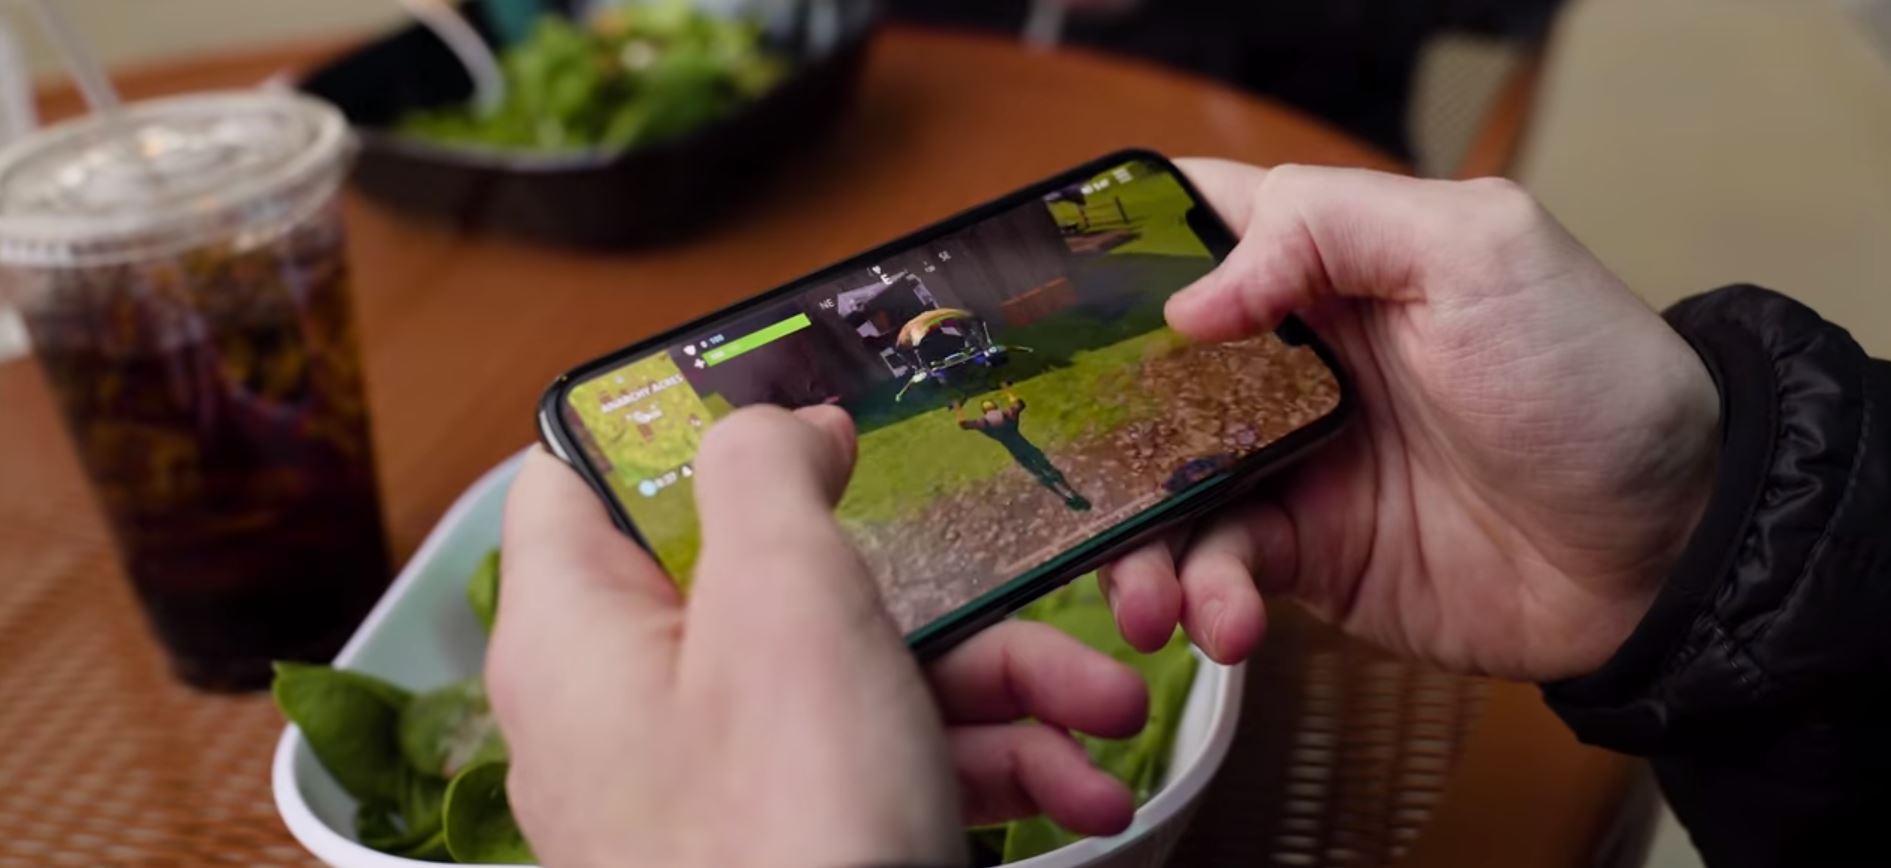 Fortnite mobile runs at 60fps but at a cost, says GameBench